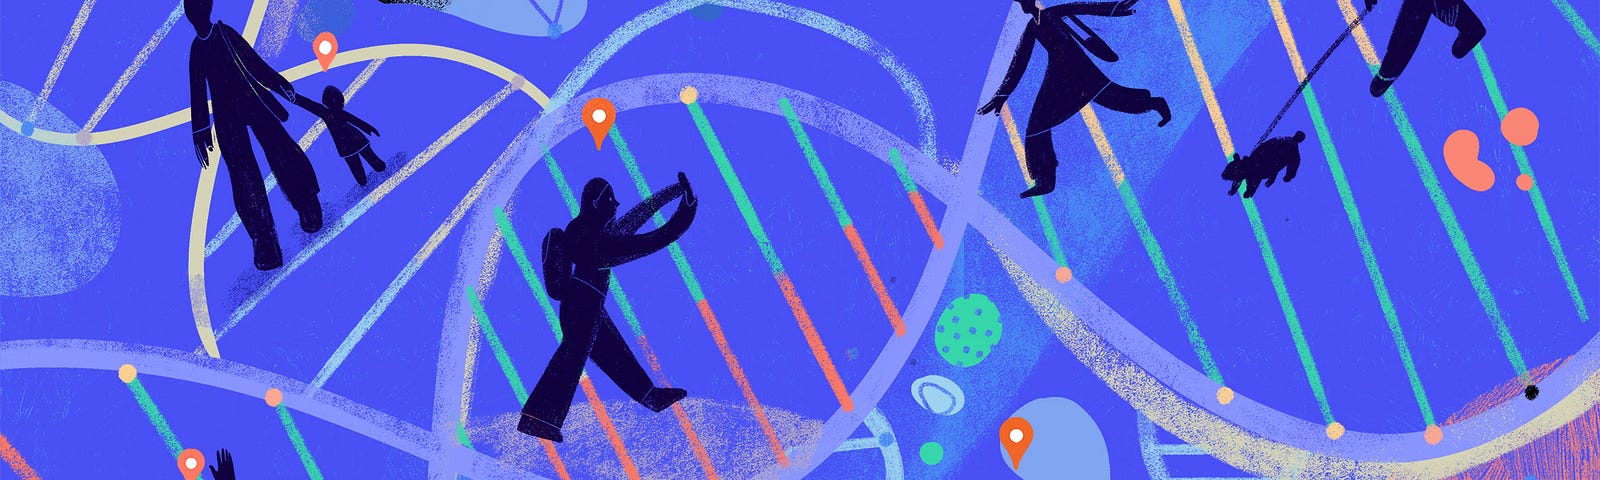 Illustration of figures with location trackers overhead walking through DNA and cells